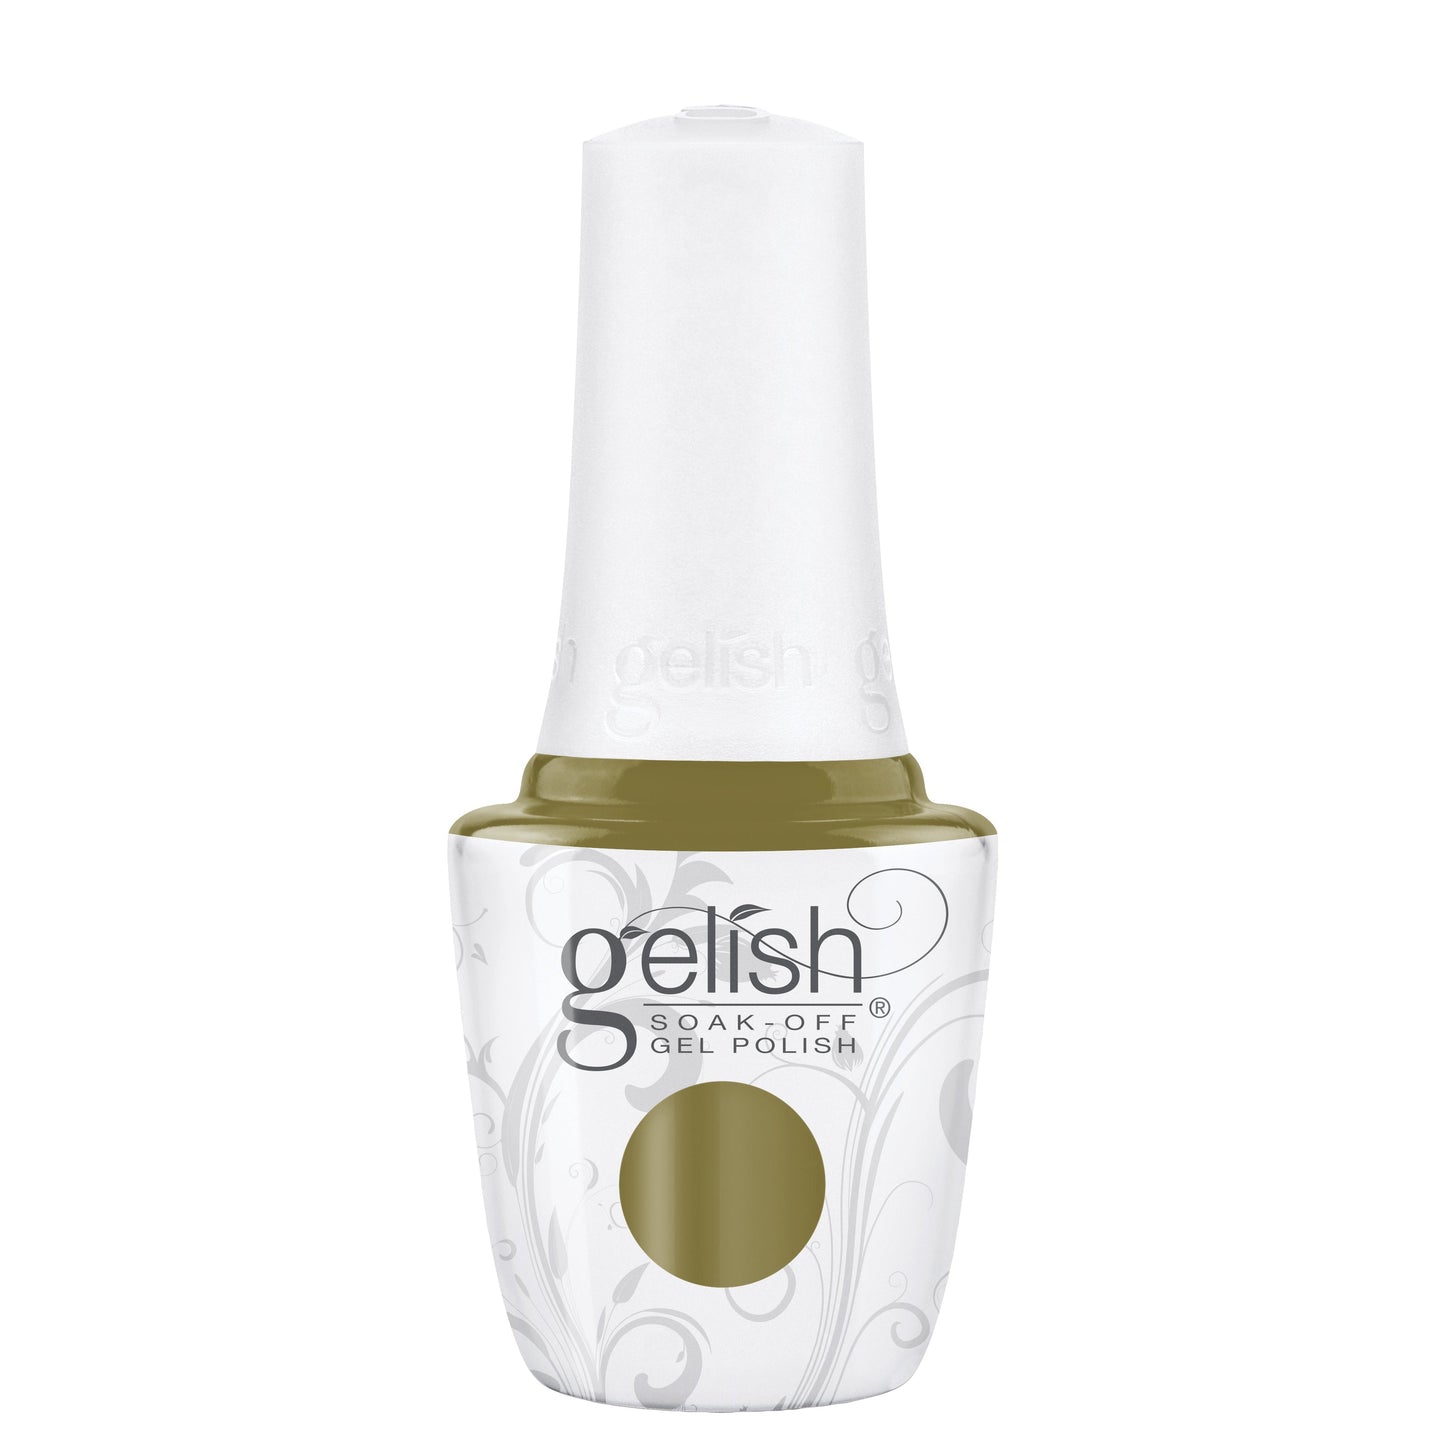 Harmony Gelish Lost My Terrain Of Thought - #1110496 - Universal Nail Supplies